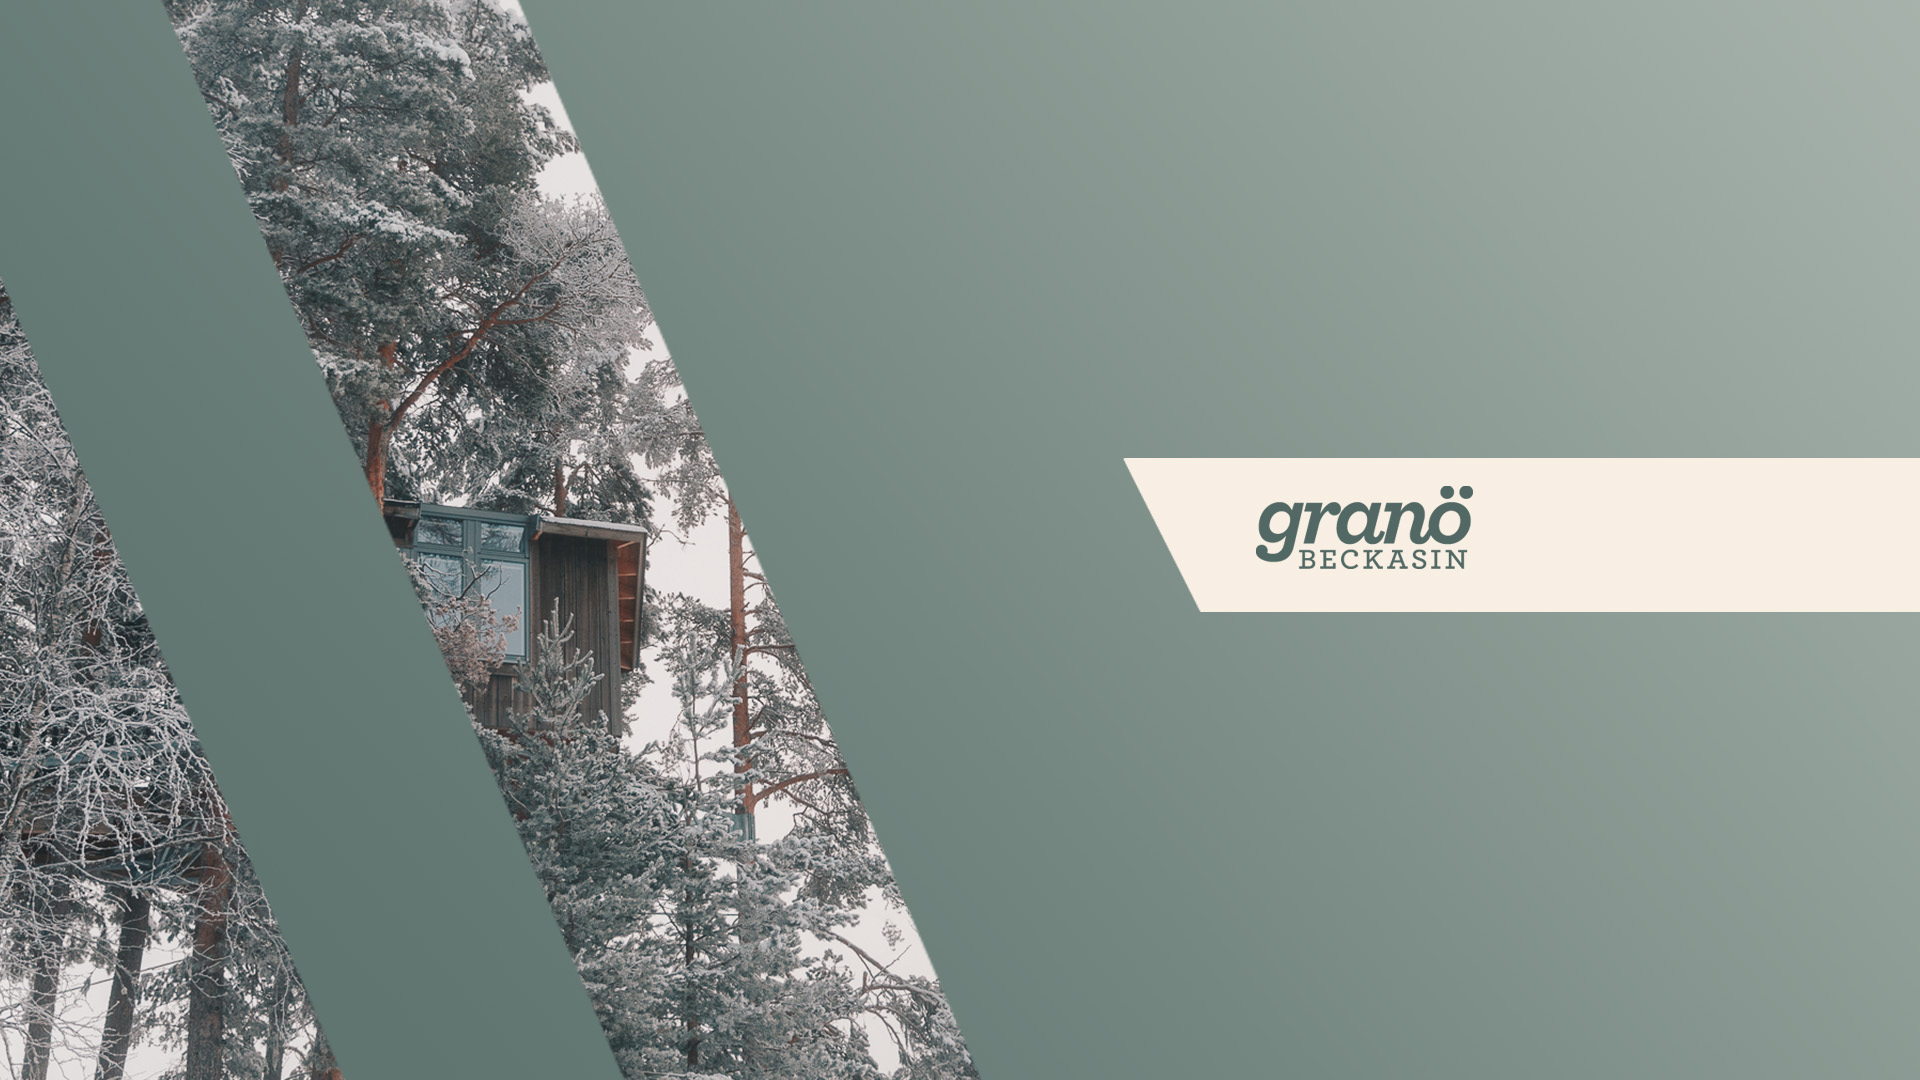 Sustainable tourist destinations Granö Beckasin signs up – Vidde now has more than 100 pre-orders